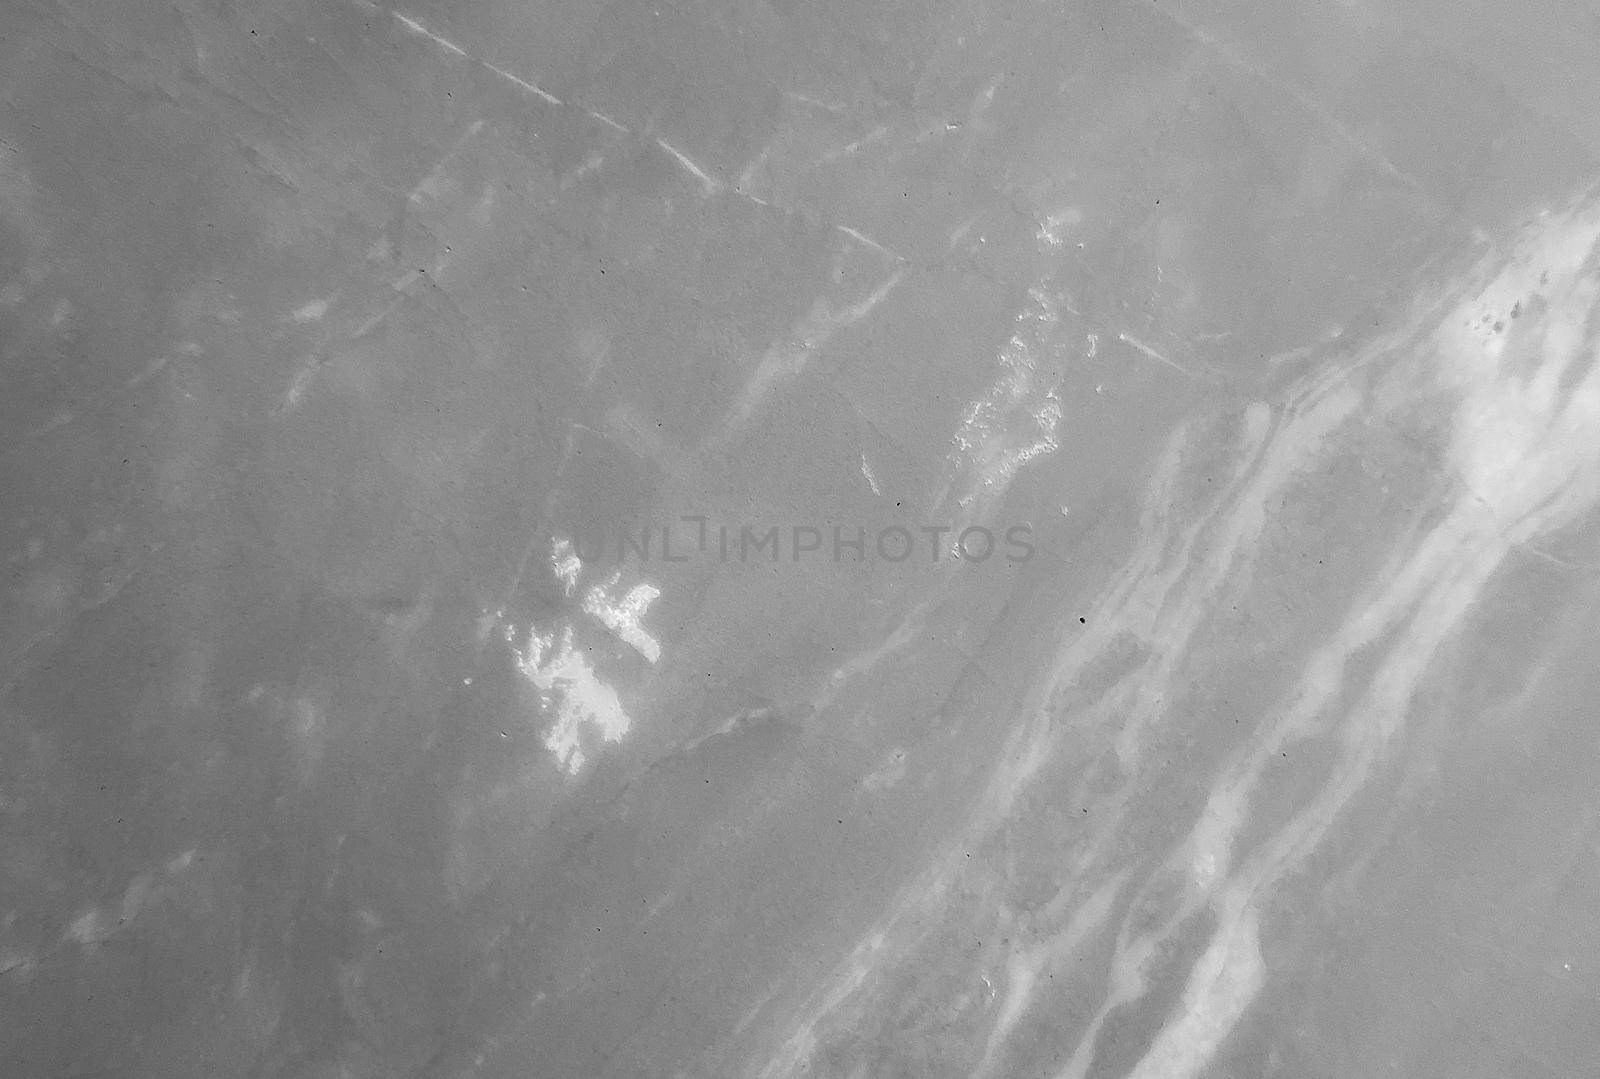 Black marble natural pattern for background, abstract black and white.